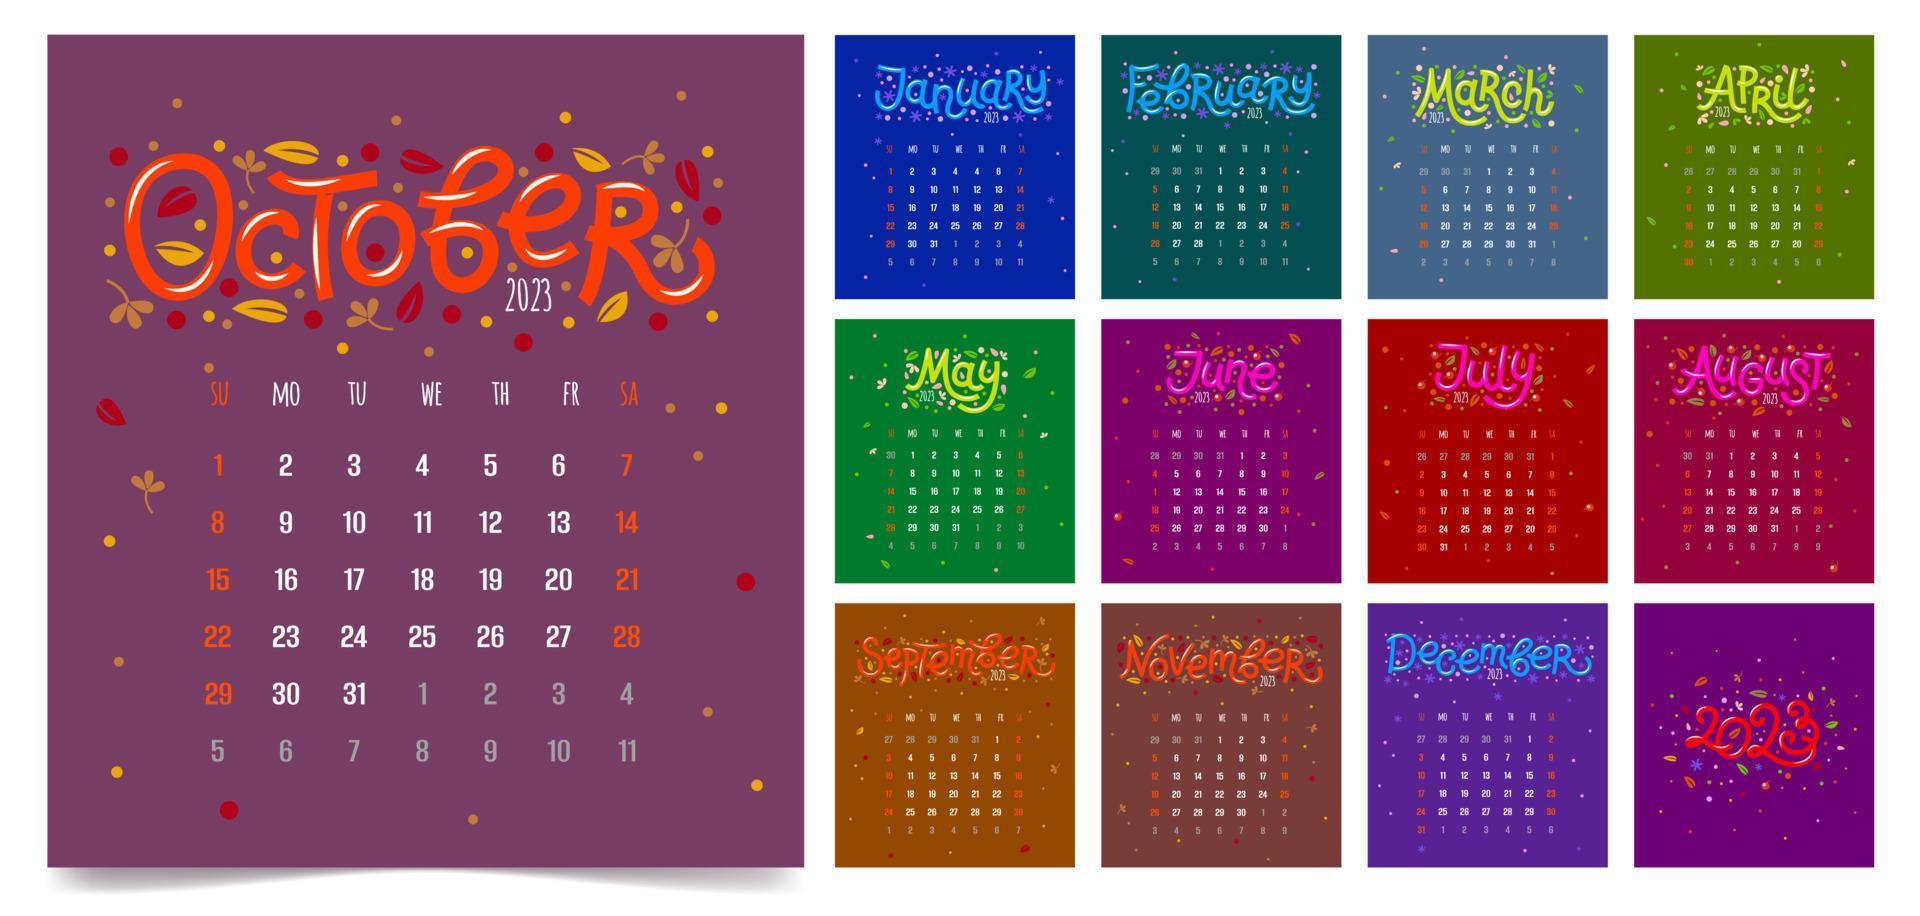 2023 calendar planner. Covers and pages for 12 months. The week starts on Sunday. vector